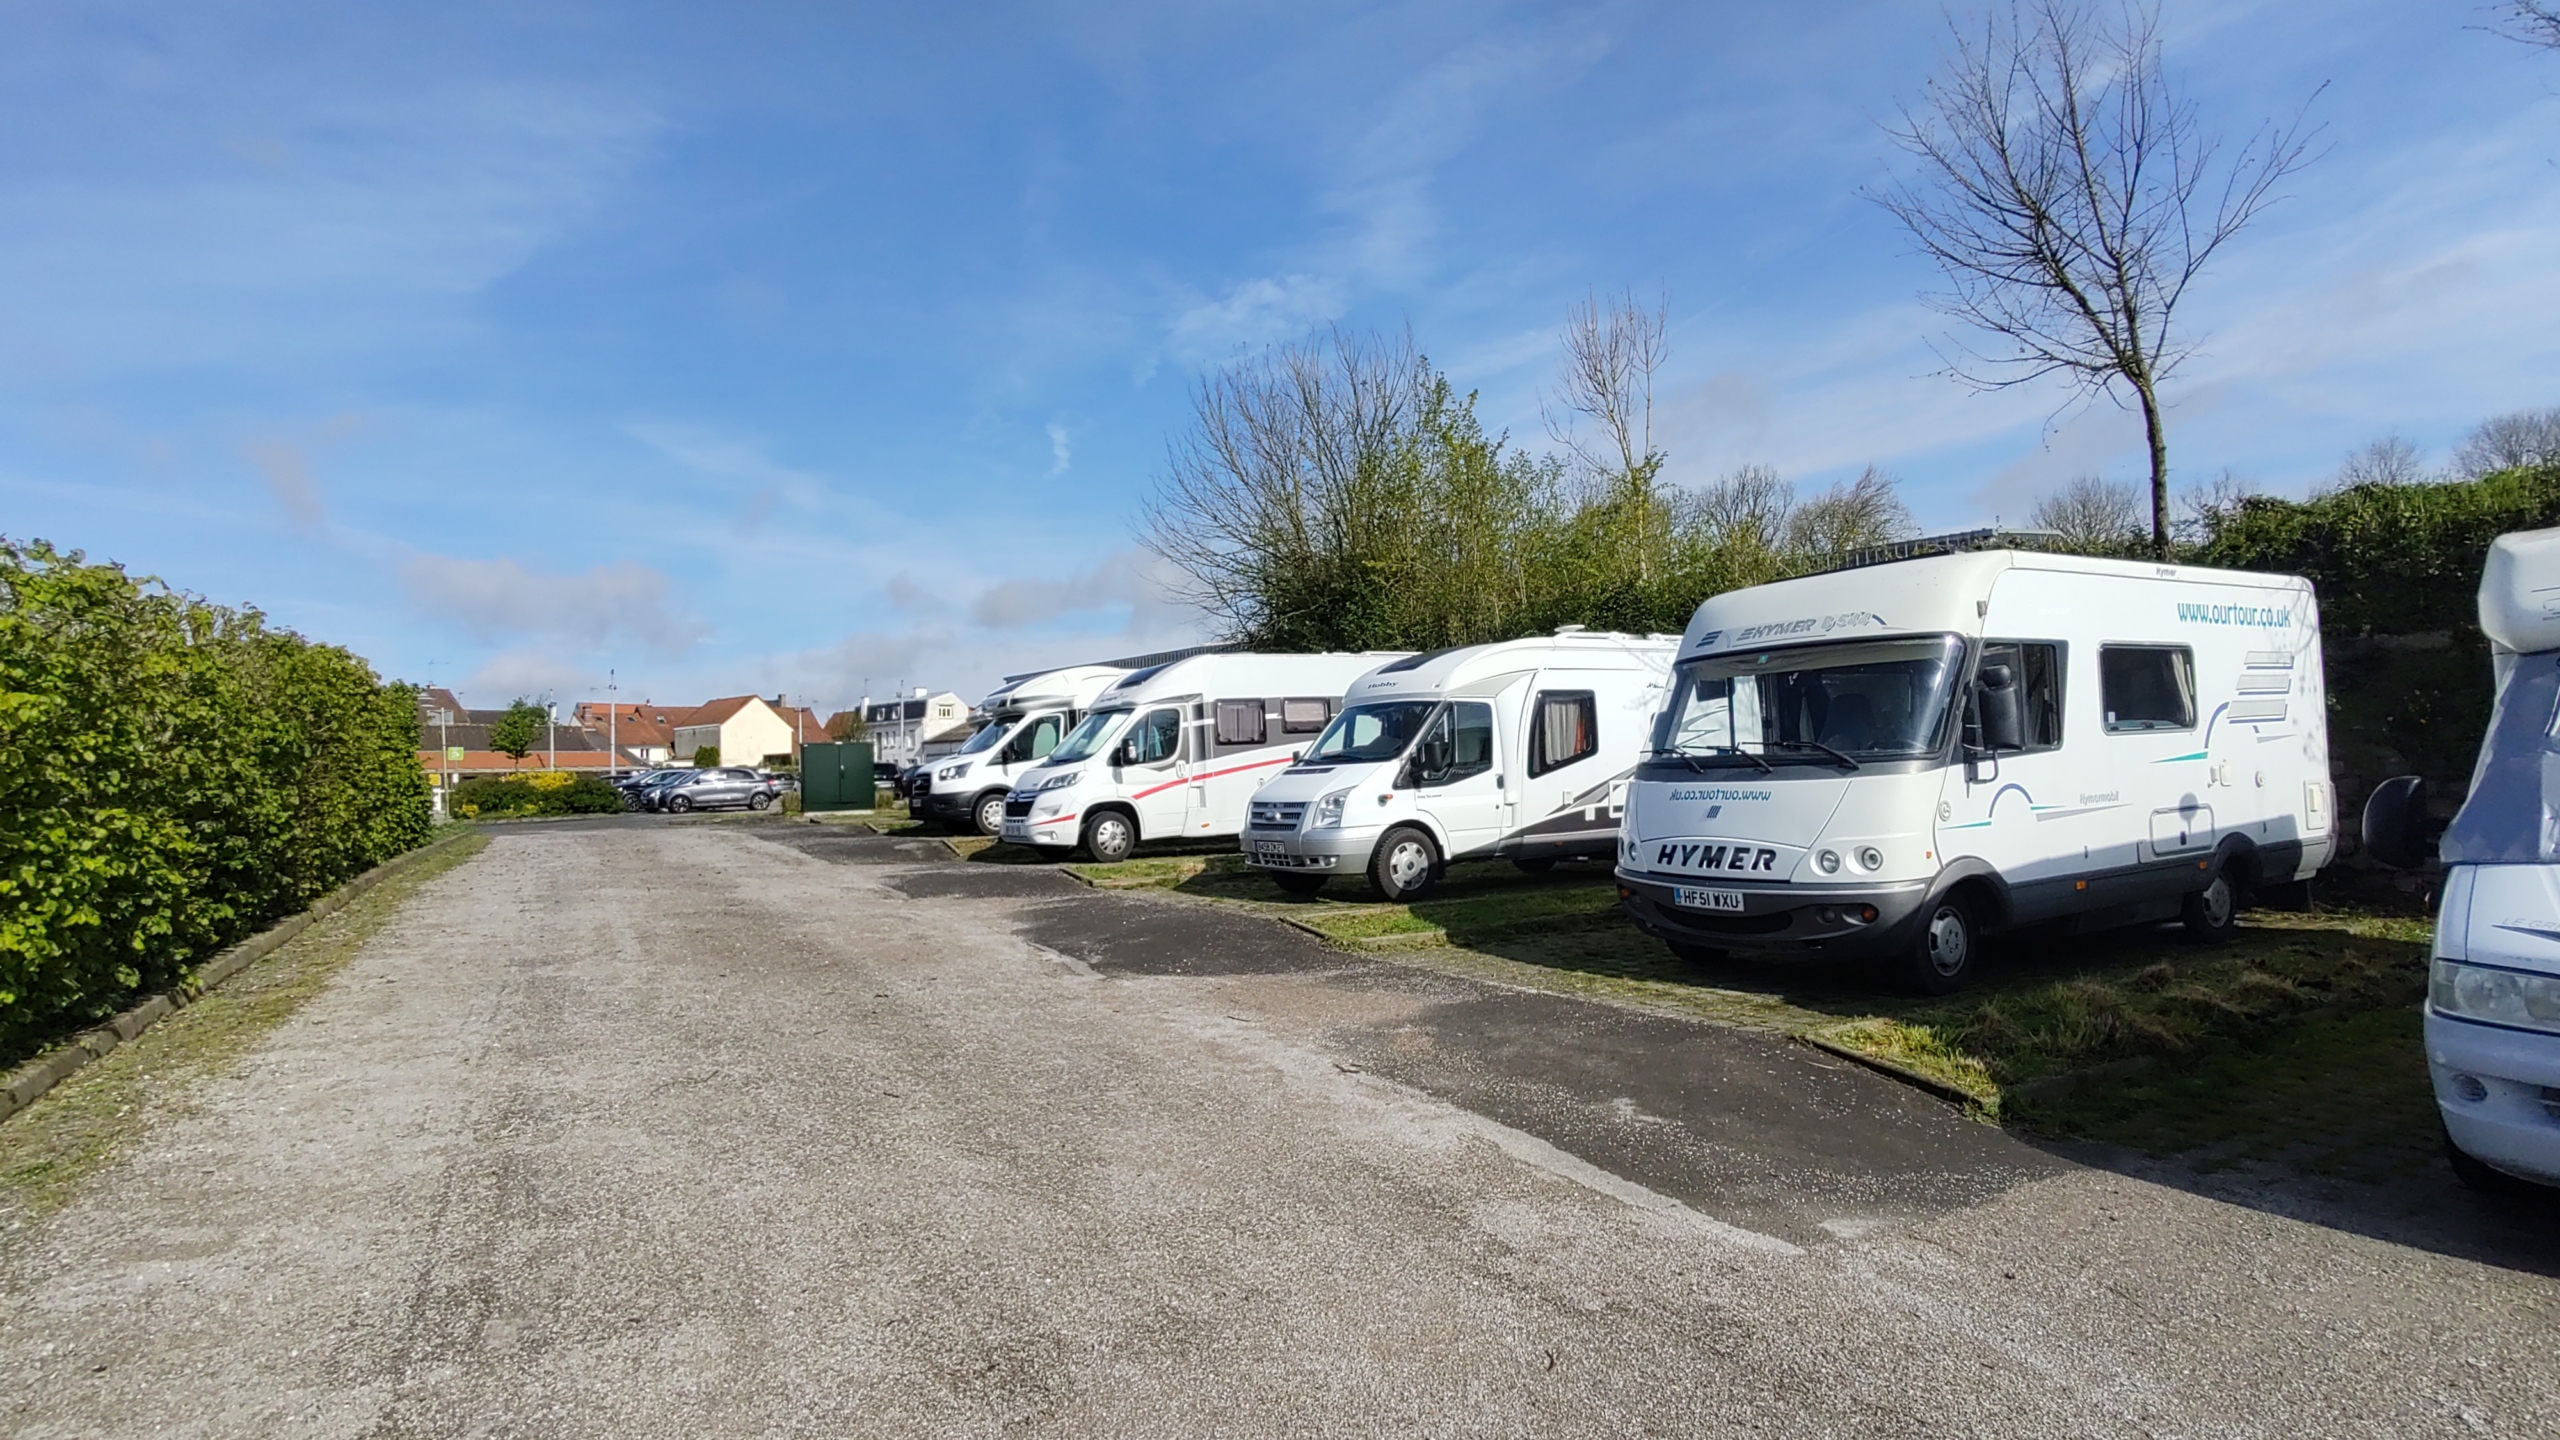 It's Been a While, But We're Away - Our Tour Motorhome Blog